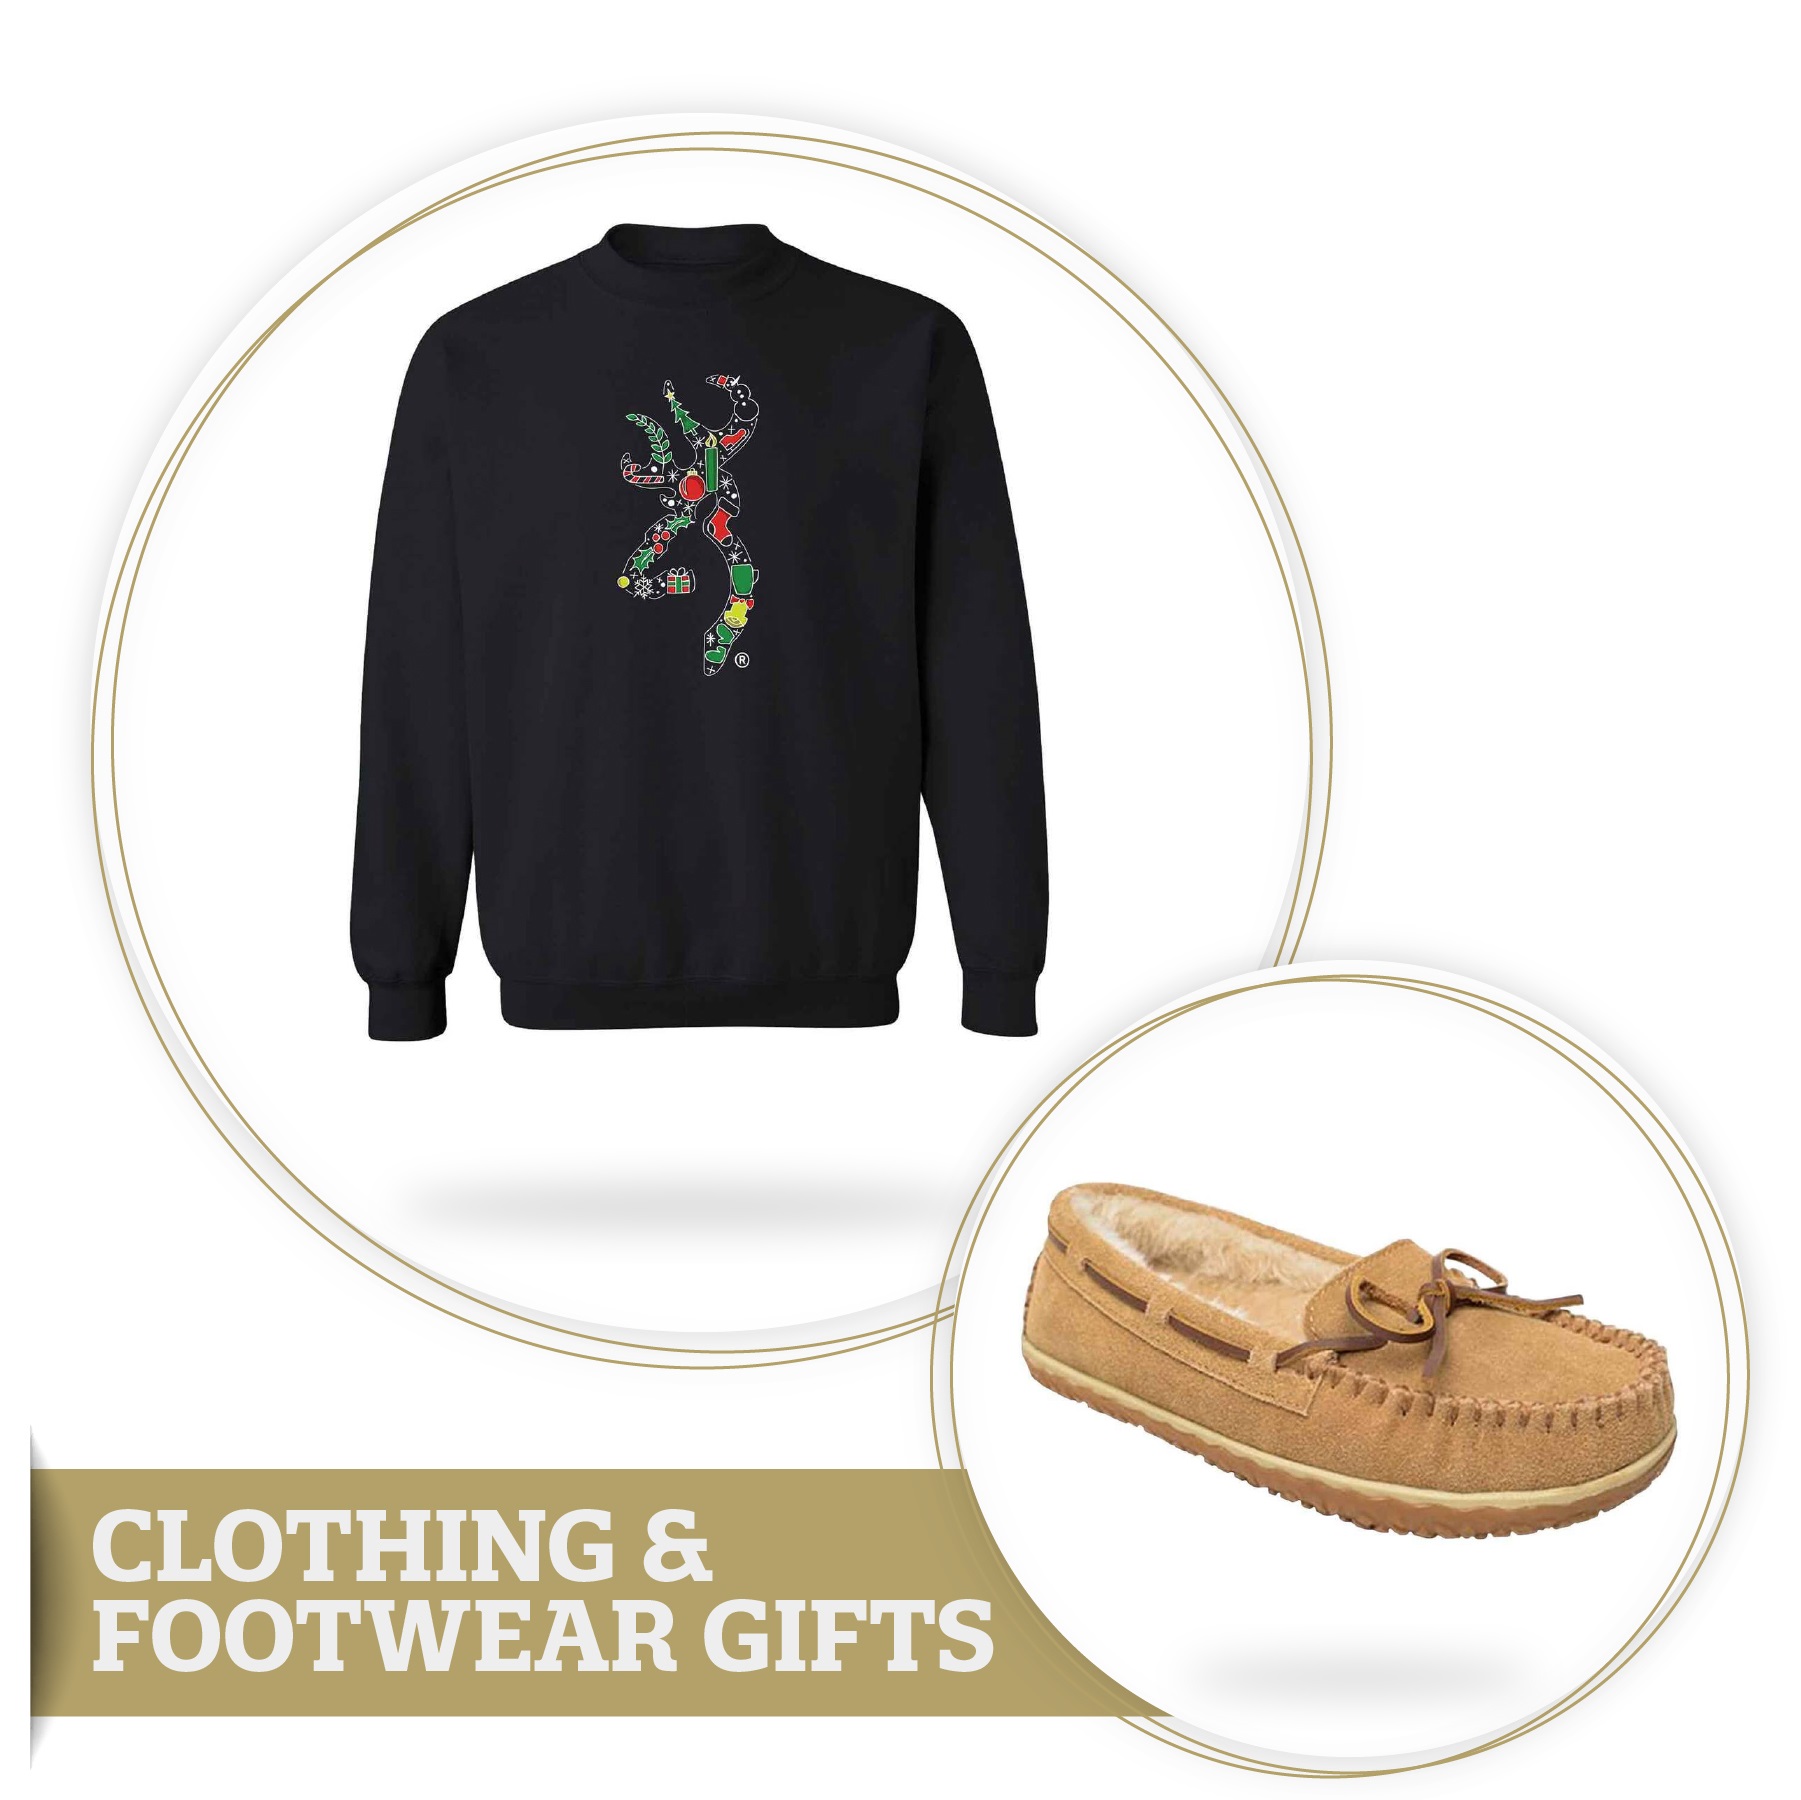 Clothing & Footwear Gifts